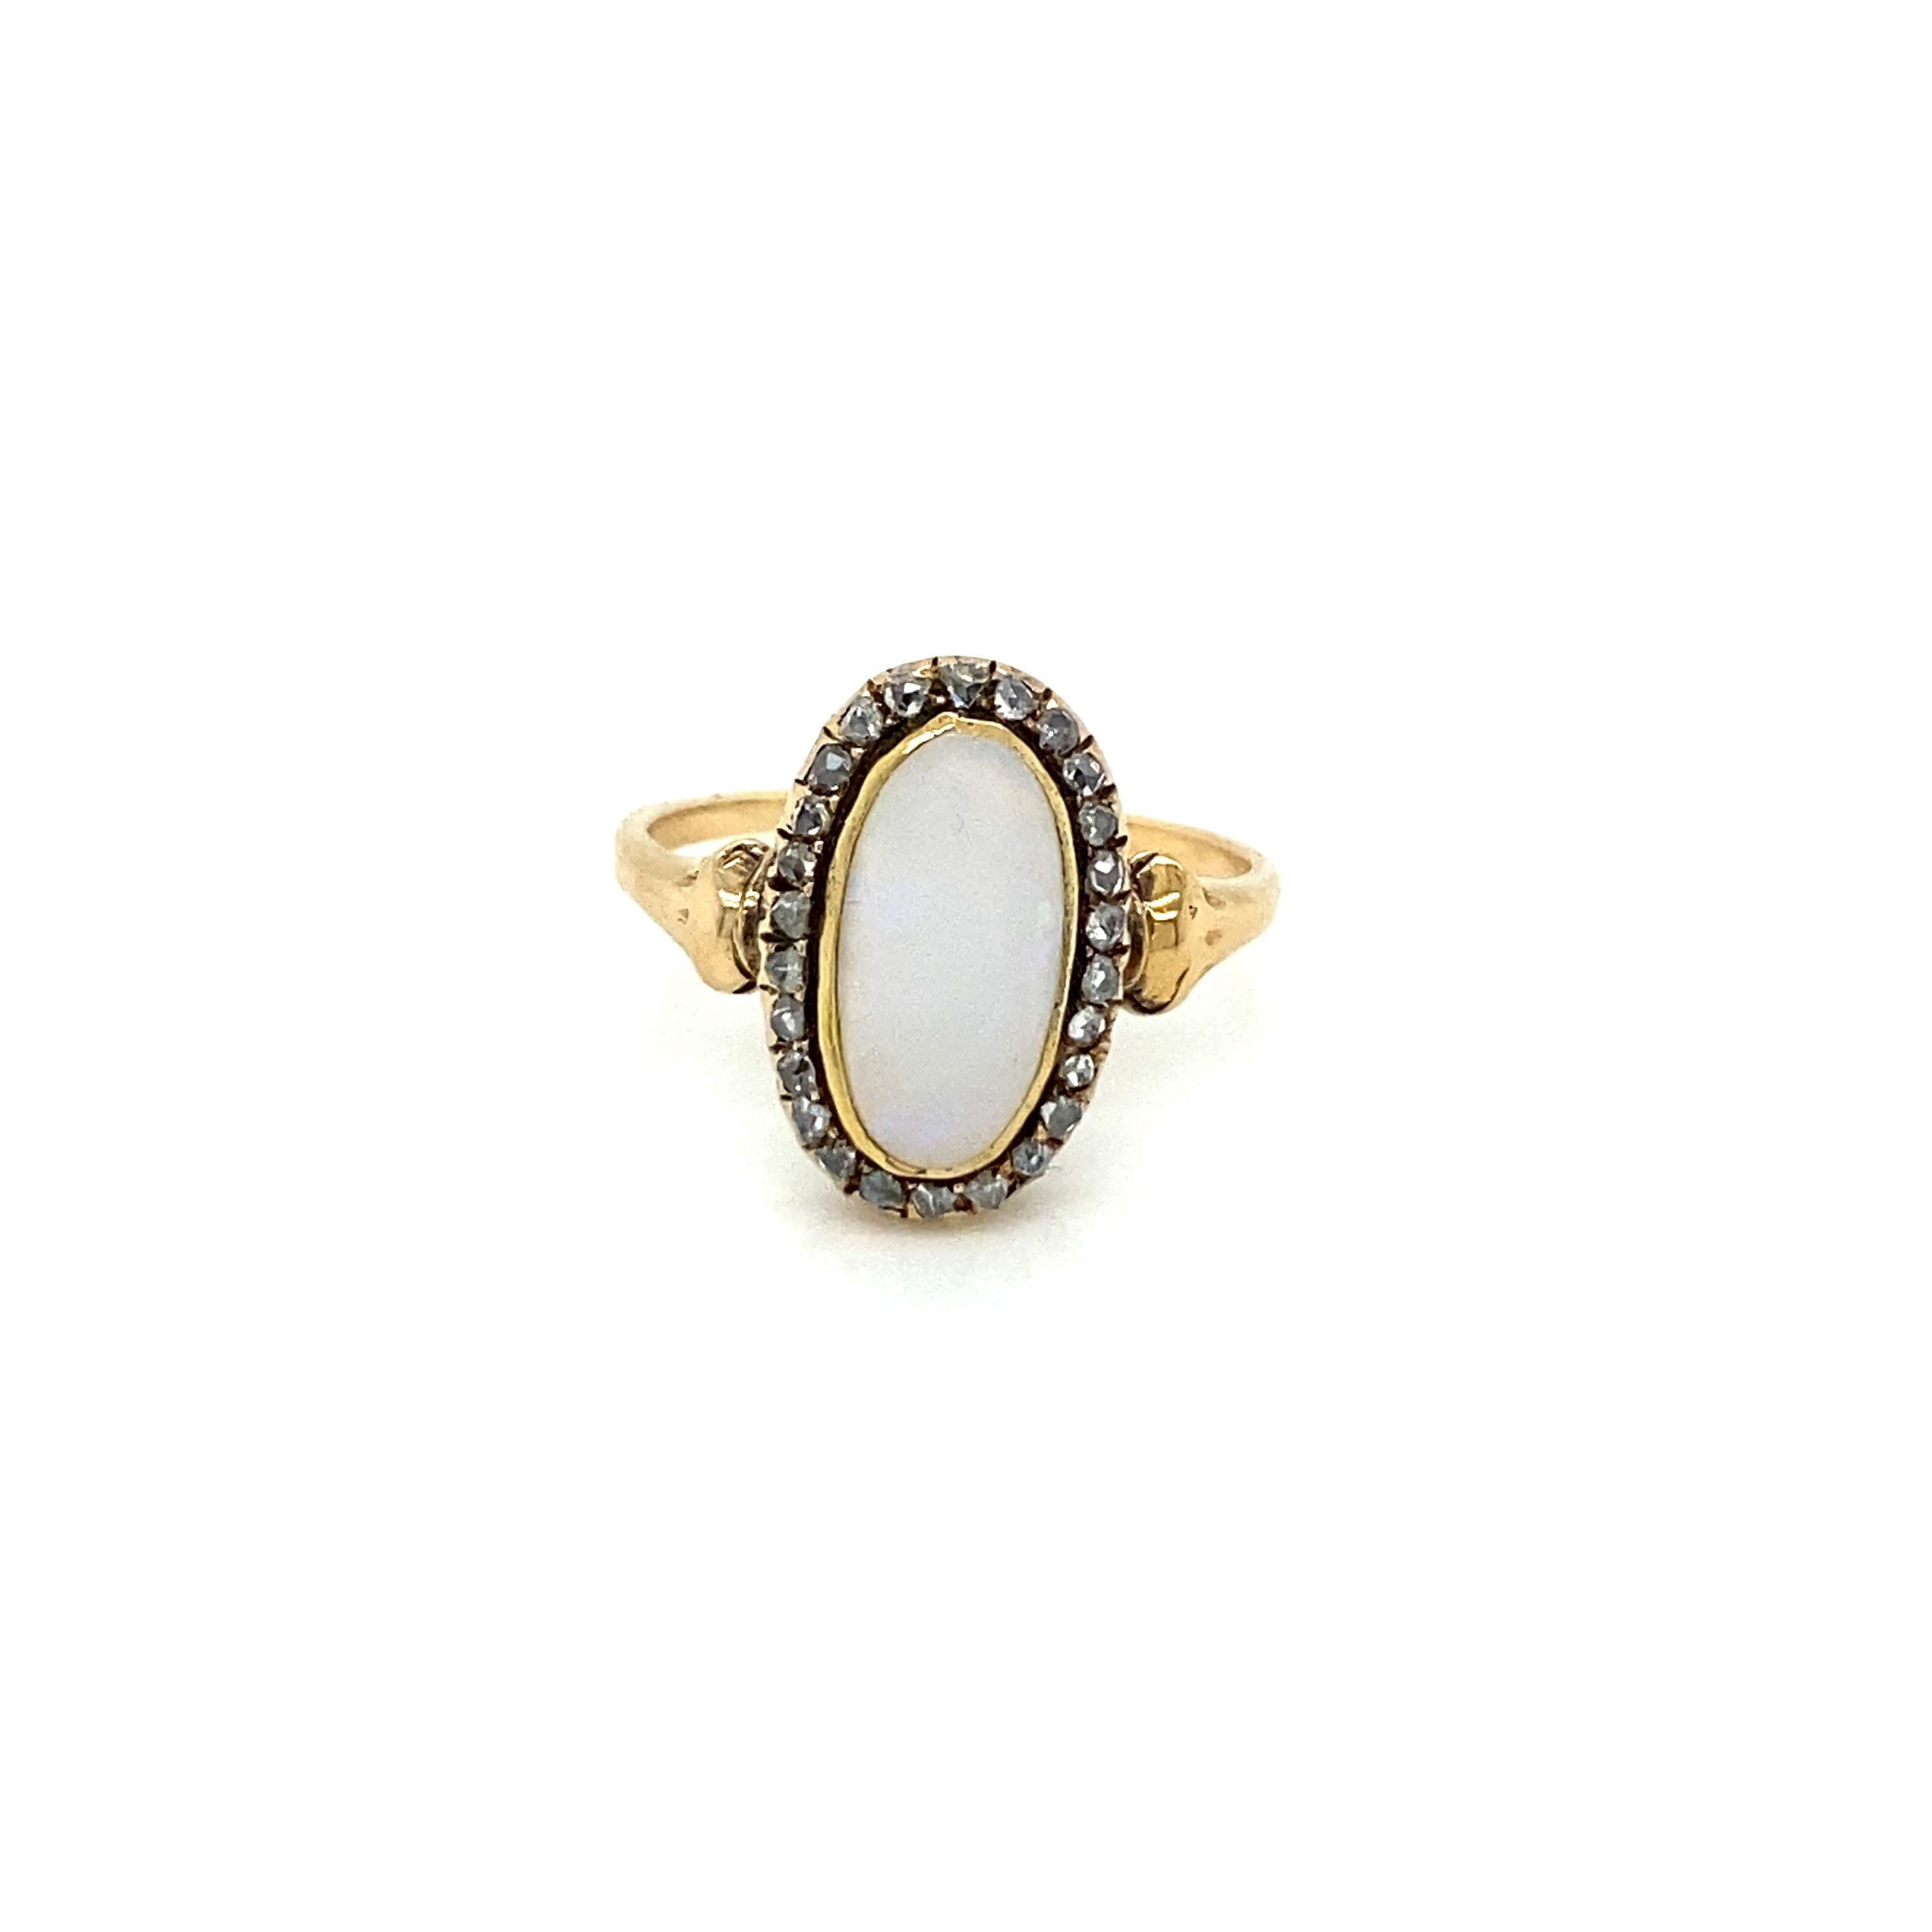 A beautiful Antique Opal and diamond ring, set in the centre with a Natural Opal cabochon and adorned by 0.30 carats Rose cut diamonds. Circa 1900'

CONDITION: Pre-owned - Excellent
METAL: 12k Gold
GEM STONE: Opal, Diamond 0.30 total carats 
RING